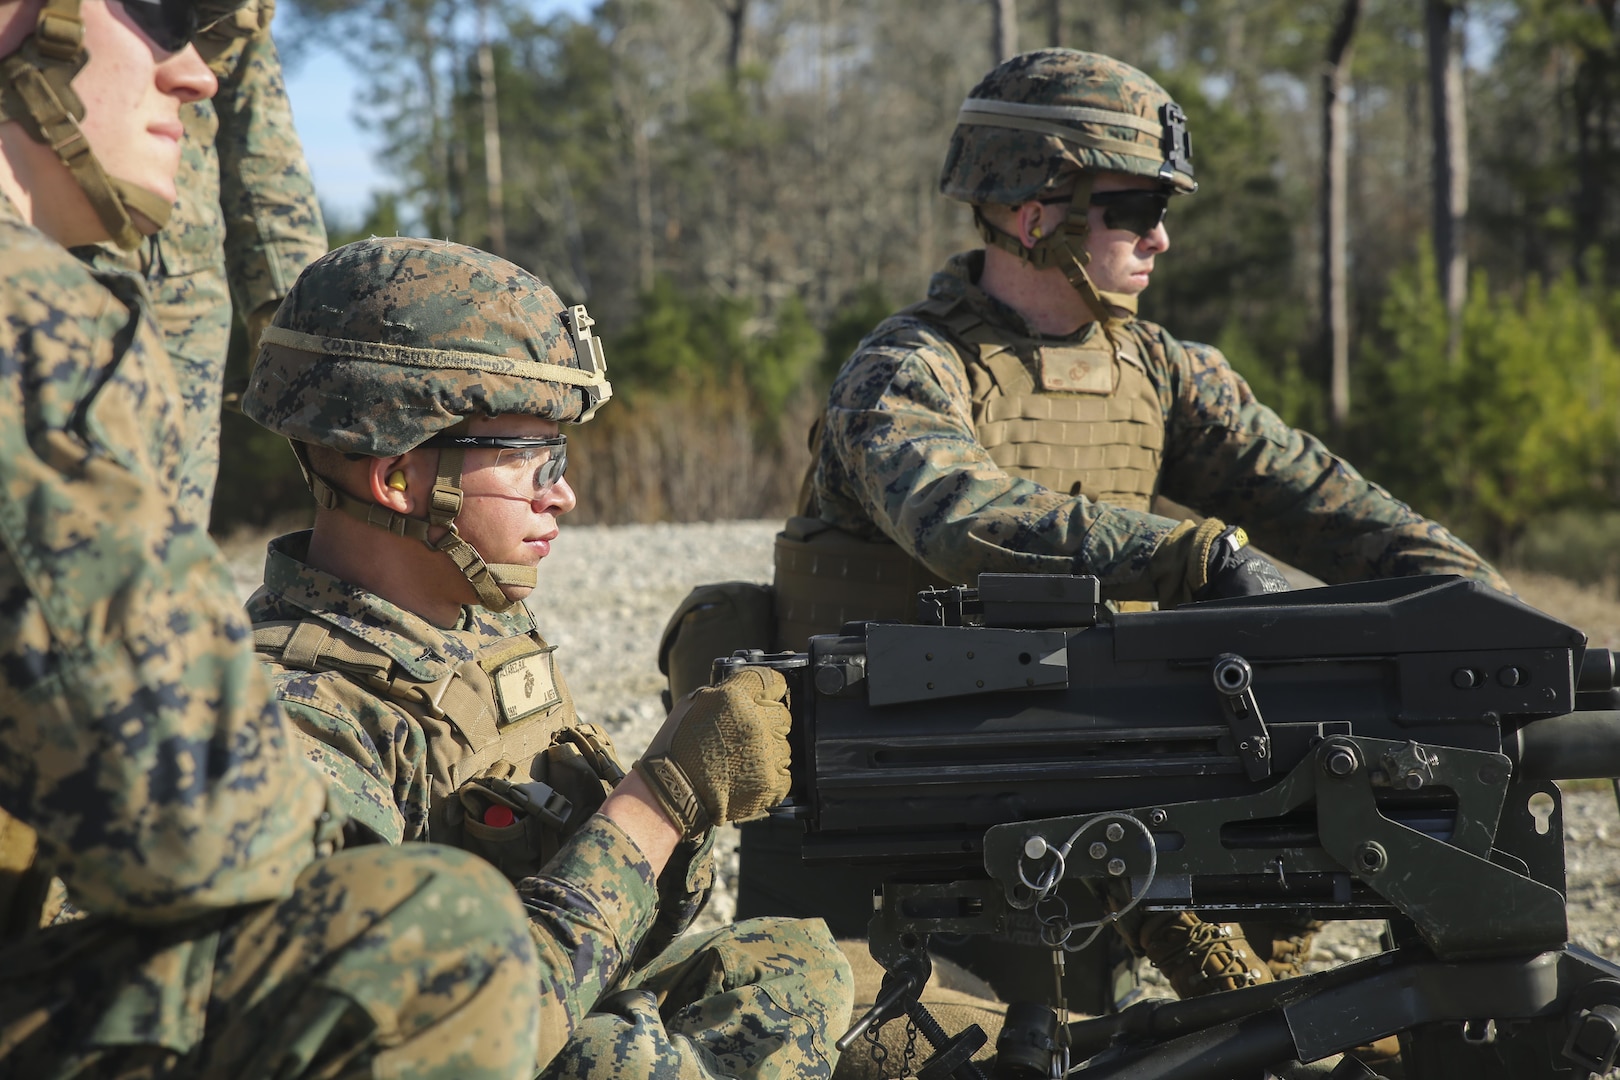 A Marine with Task Force Southwest fires an Mk 19 grenade launcher during a combined arms range at Camp Lejeune, N.C., Jan. 18, 2016. About 25 Marines trained to familiarize themselves on the weapon system in preparation for an upcoming deployment to Helmand Province, Afghanistan. The unit will work in a training and advisory capacity with the Afghan National Army 215th Corps and 505th Zone National Police to reaffirm our commitment to the stability and security in the region. (U.S. Marine Corps photo by Sgt. Lucas Hopkins)